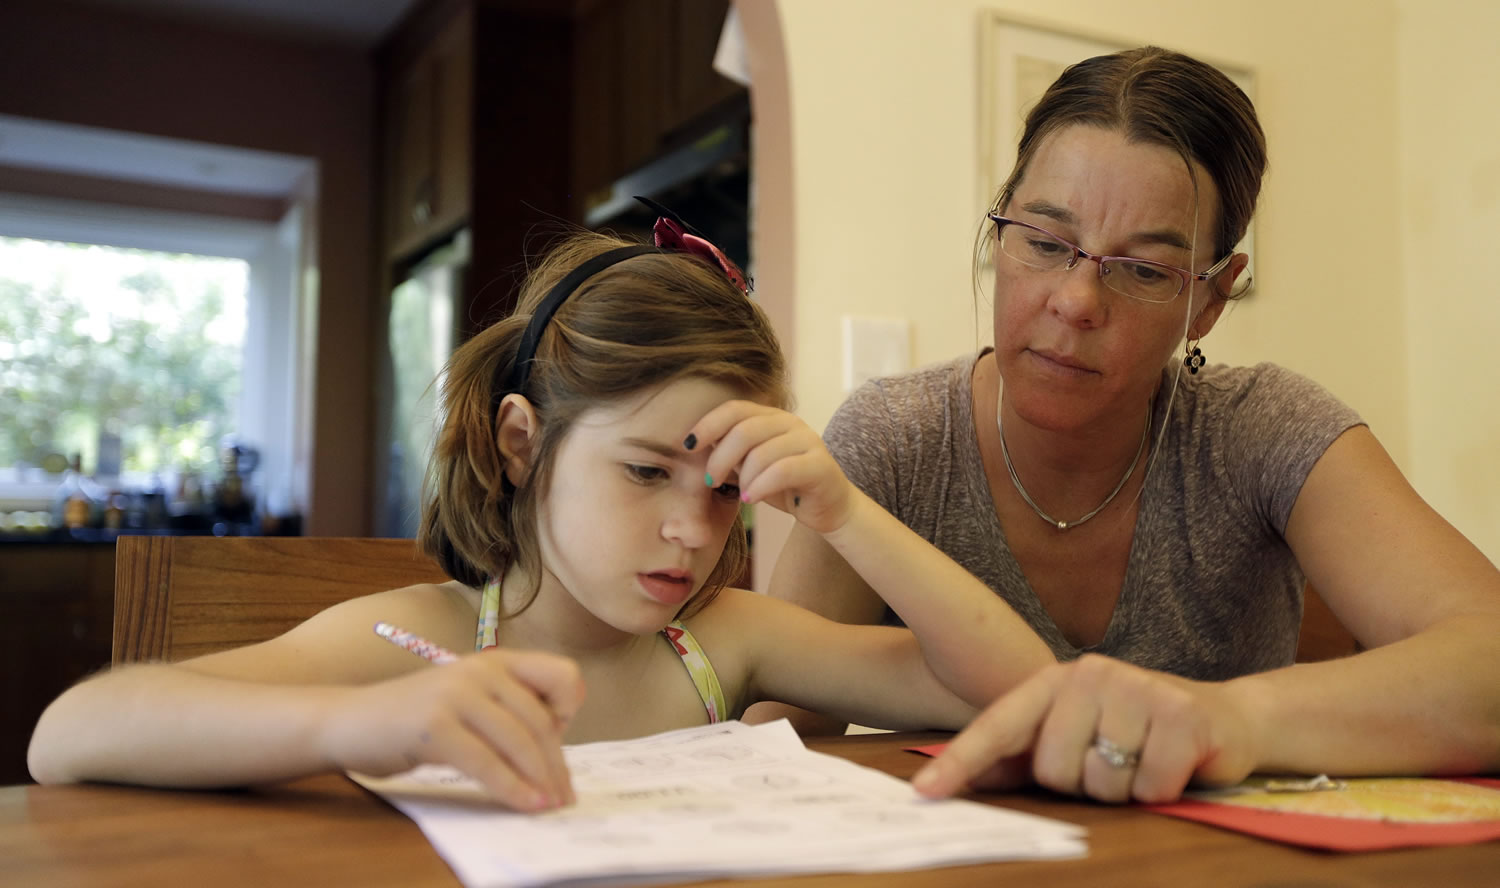 Associated Press
Stacey Jacobson-Francis, right, works on math homework with her daughter Luci, 6, at their home in Berkeley, Calif. Parents trying to help their kids with math homework say the basics have become as complicated as calculus.